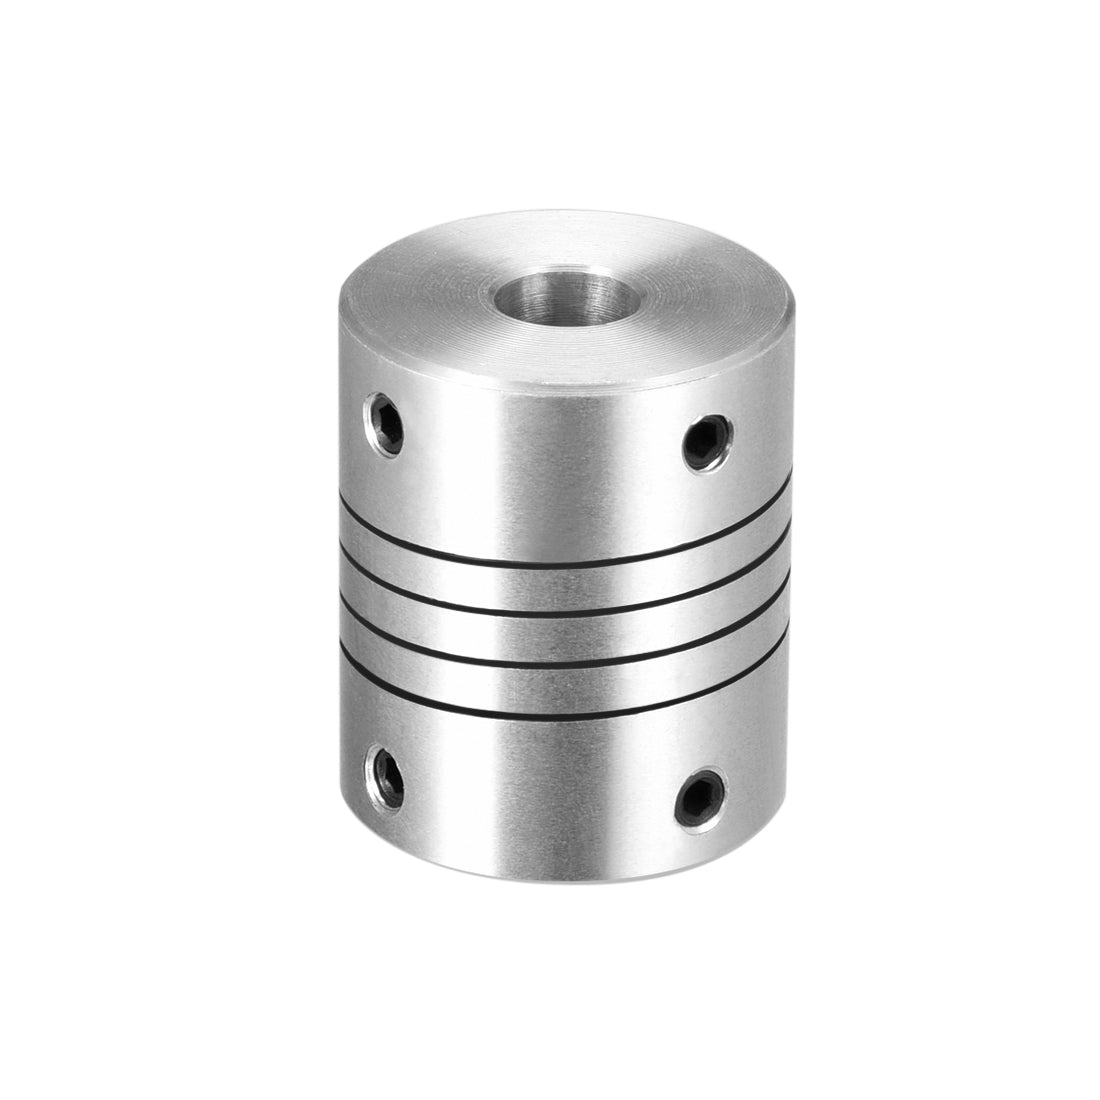 uxcell Uxcell 8mm to 8mm Aluminum Alloy Shaft Coupling Flexible Coupler Motor L30xD25